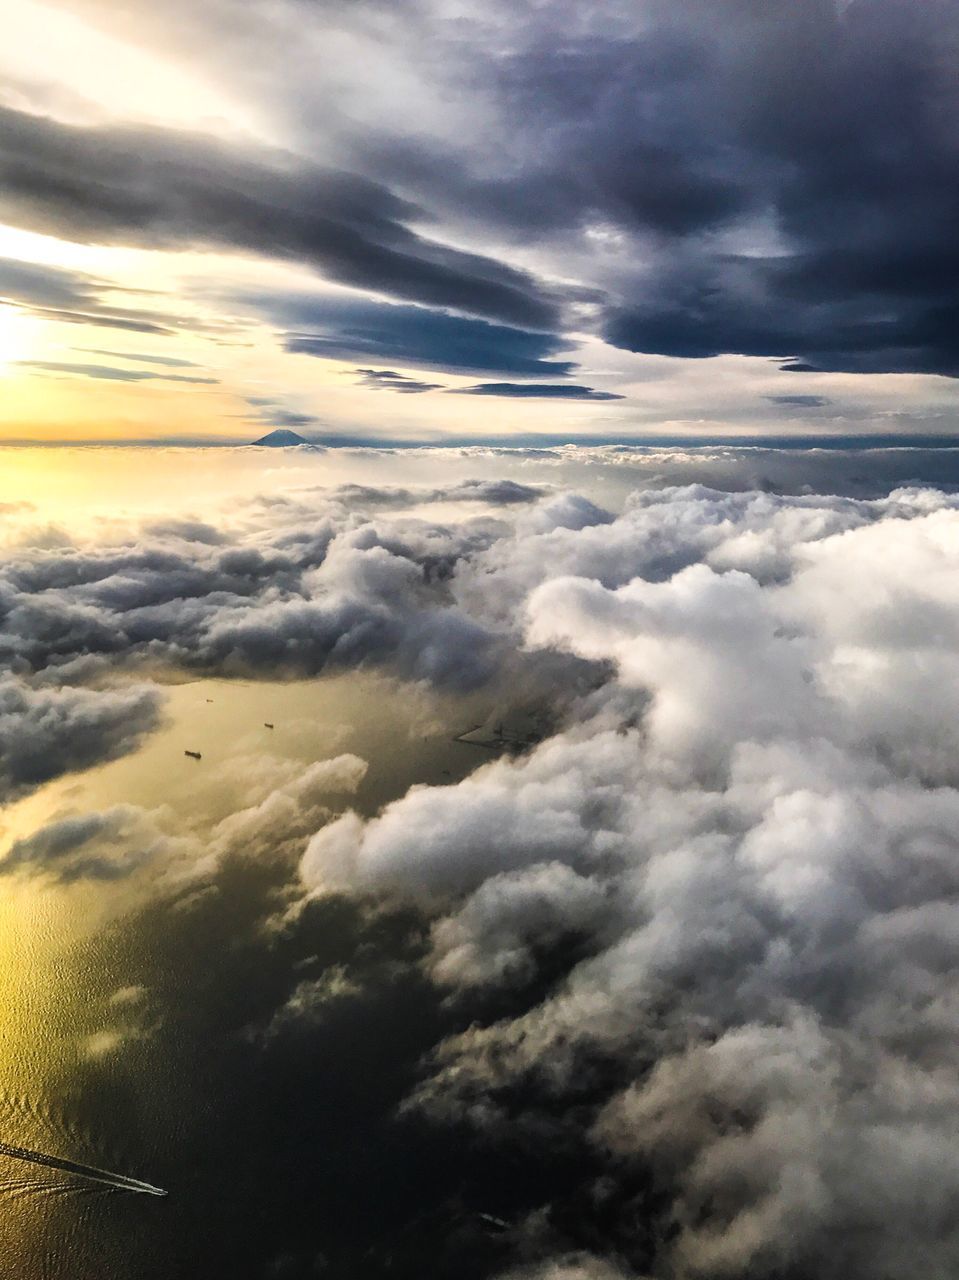 cloud - sky, cloudscape, sky, nature, beauty in nature, weather, dramatic sky, scenics, aerial view, atmospheric mood, tranquility, no people, outdoors, heaven, storm cloud, day